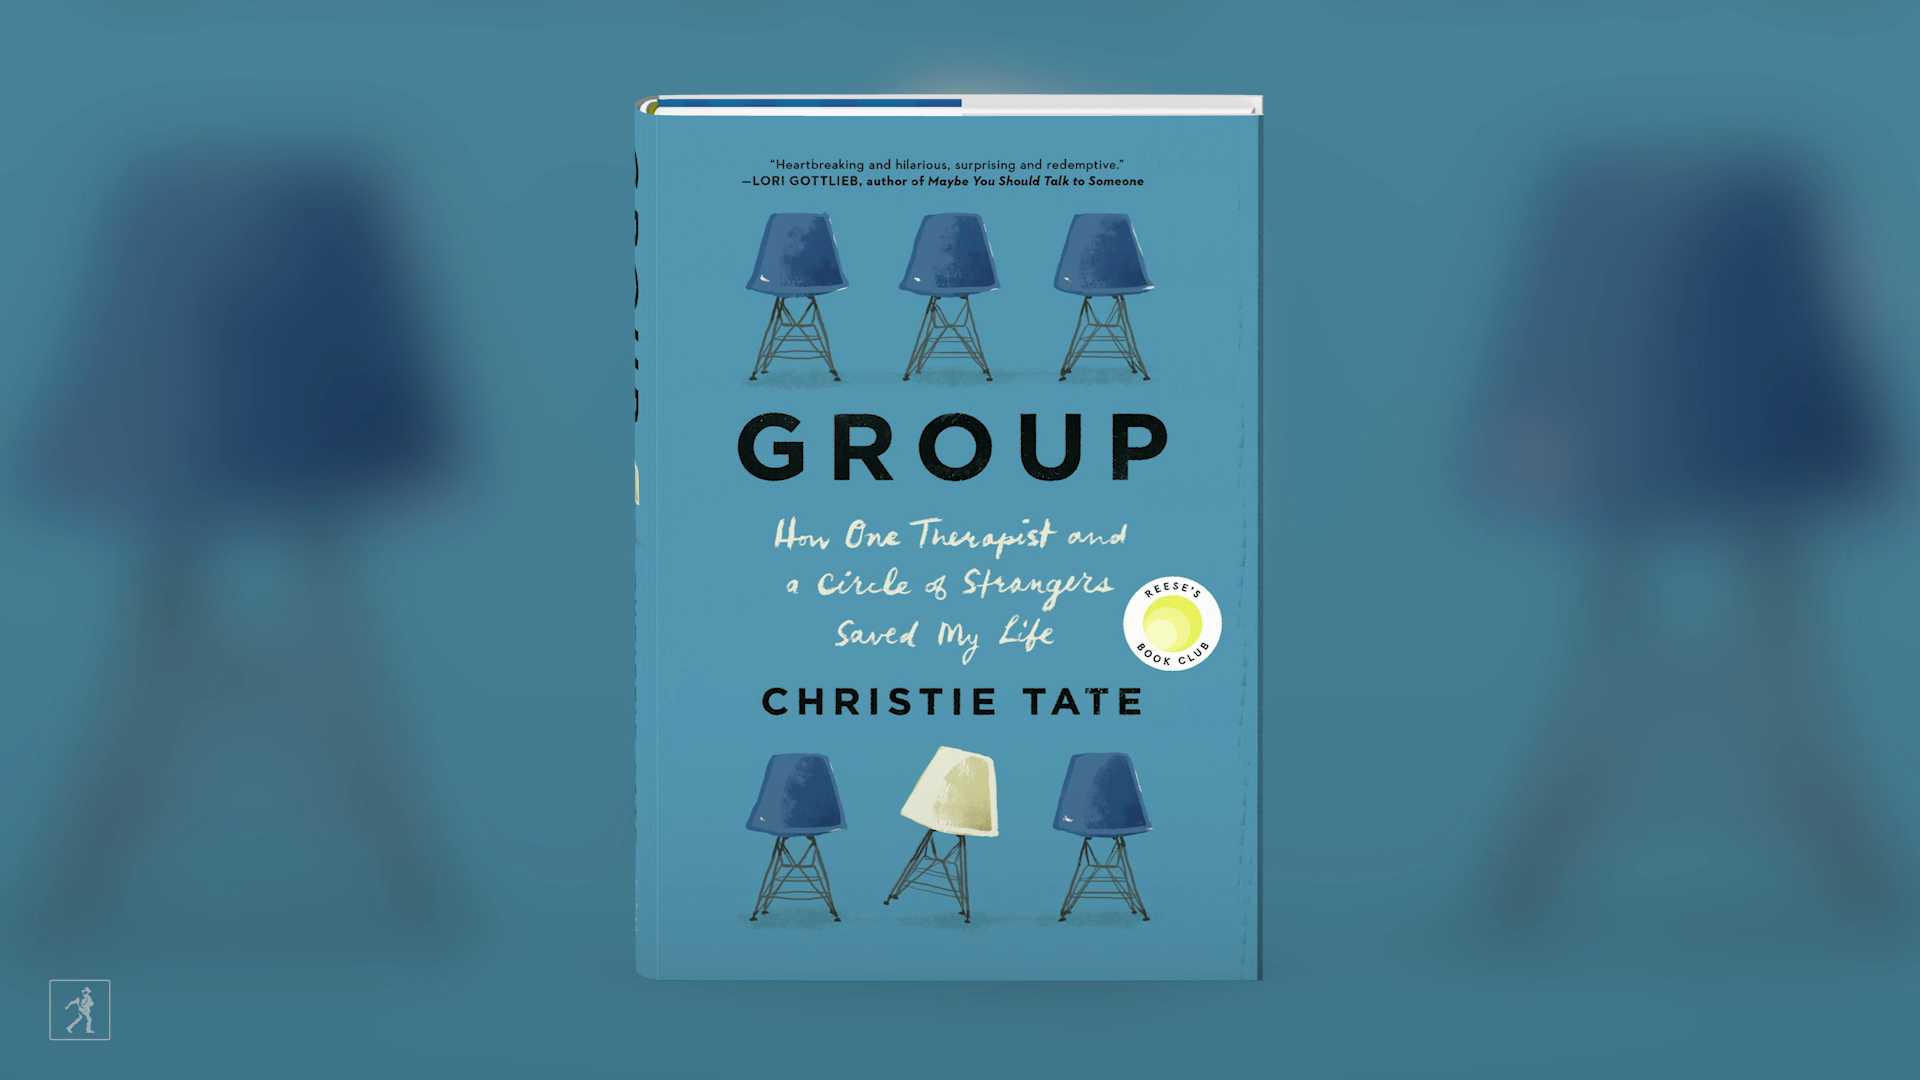 group by christie tate review